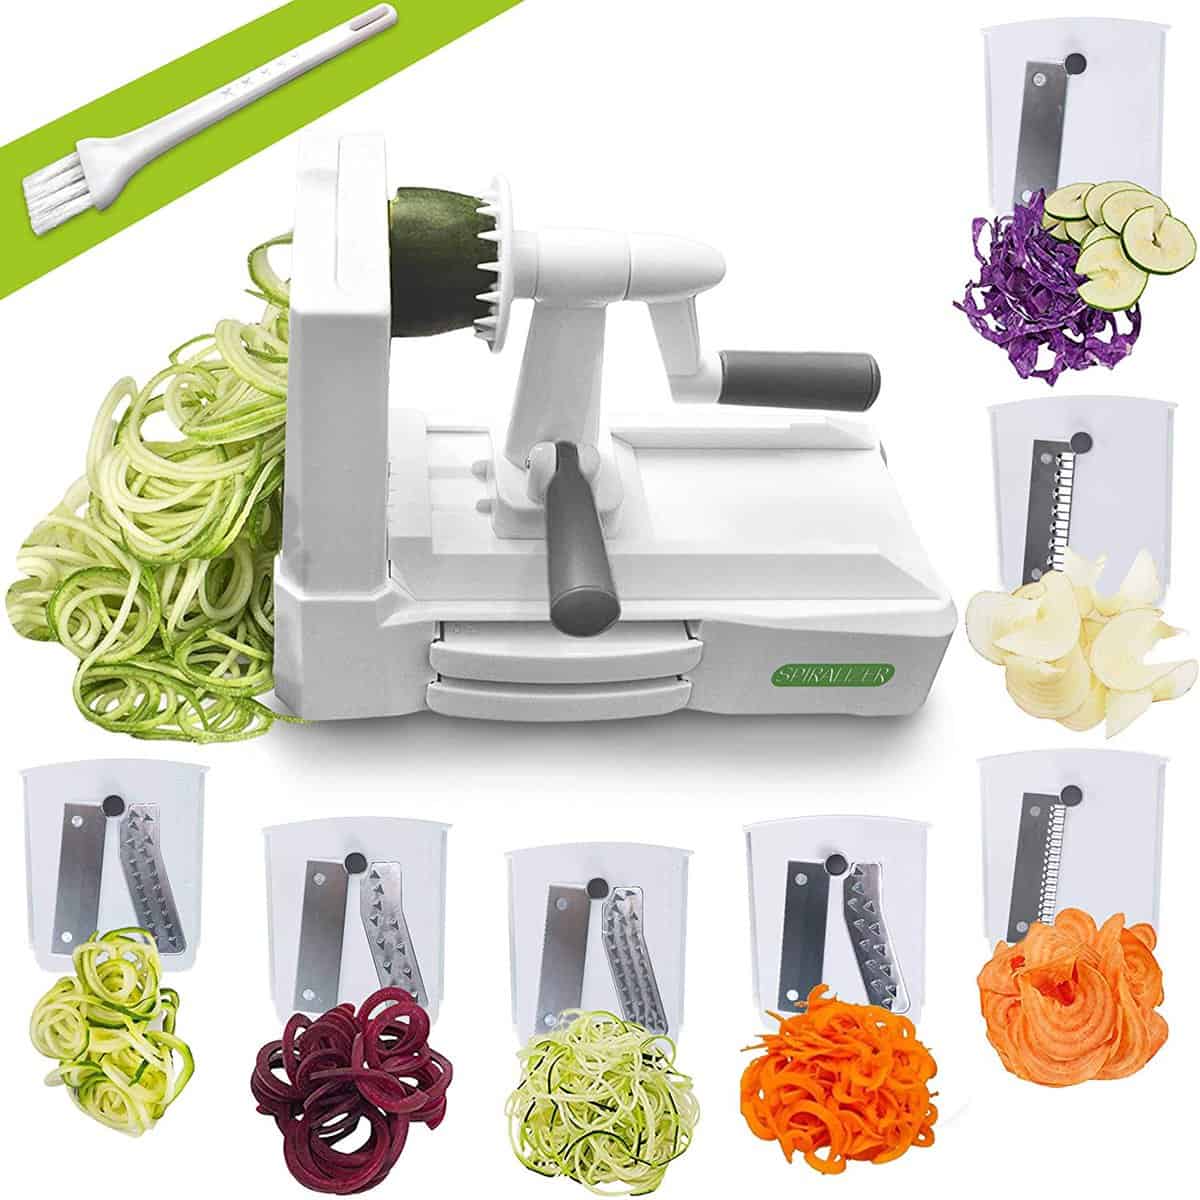 Spiralizer Gifts for keto cooks